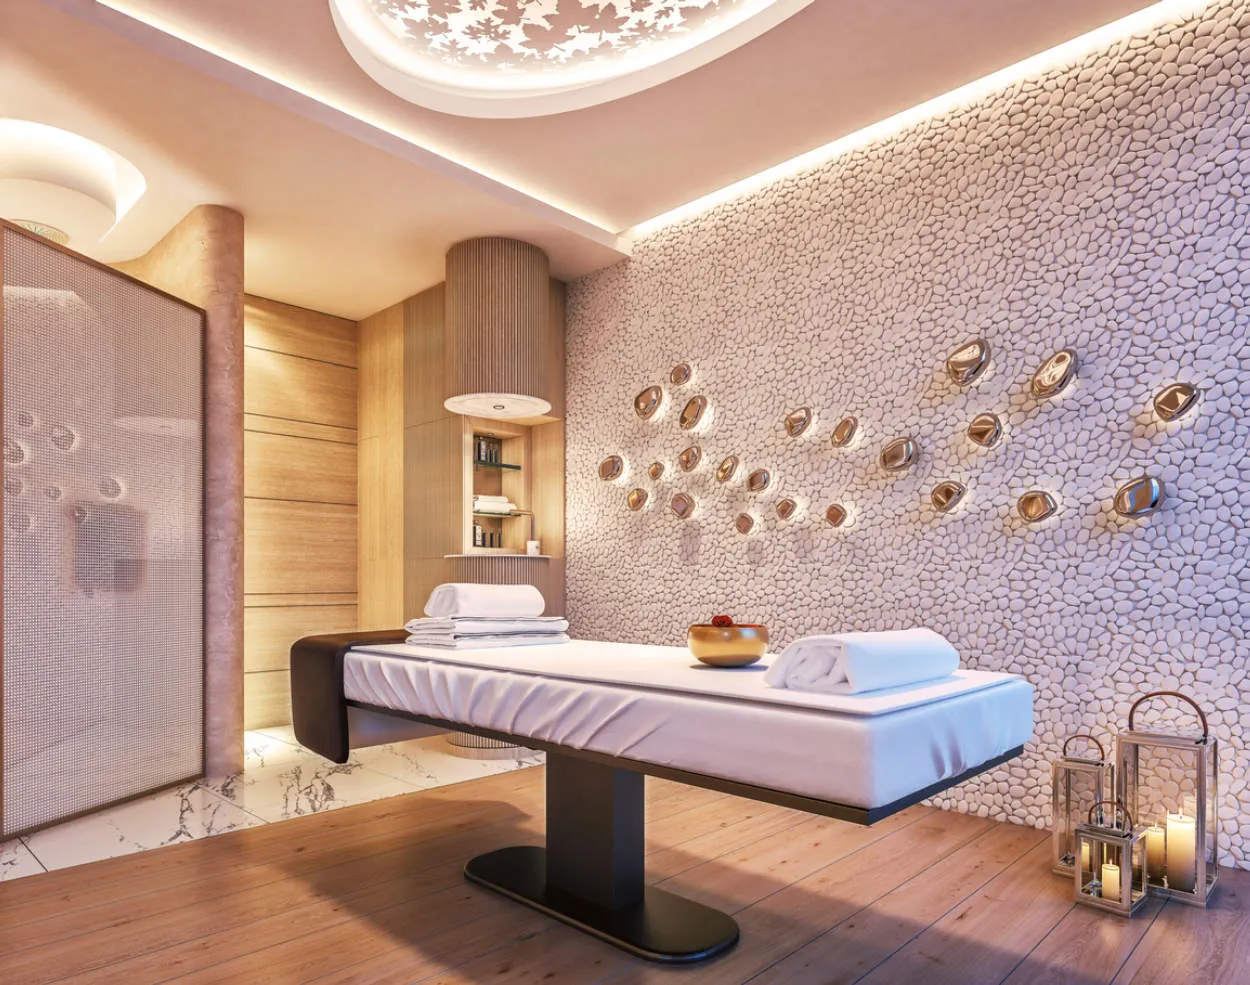 Interior Design for Wellness: Spaces that Promote Health